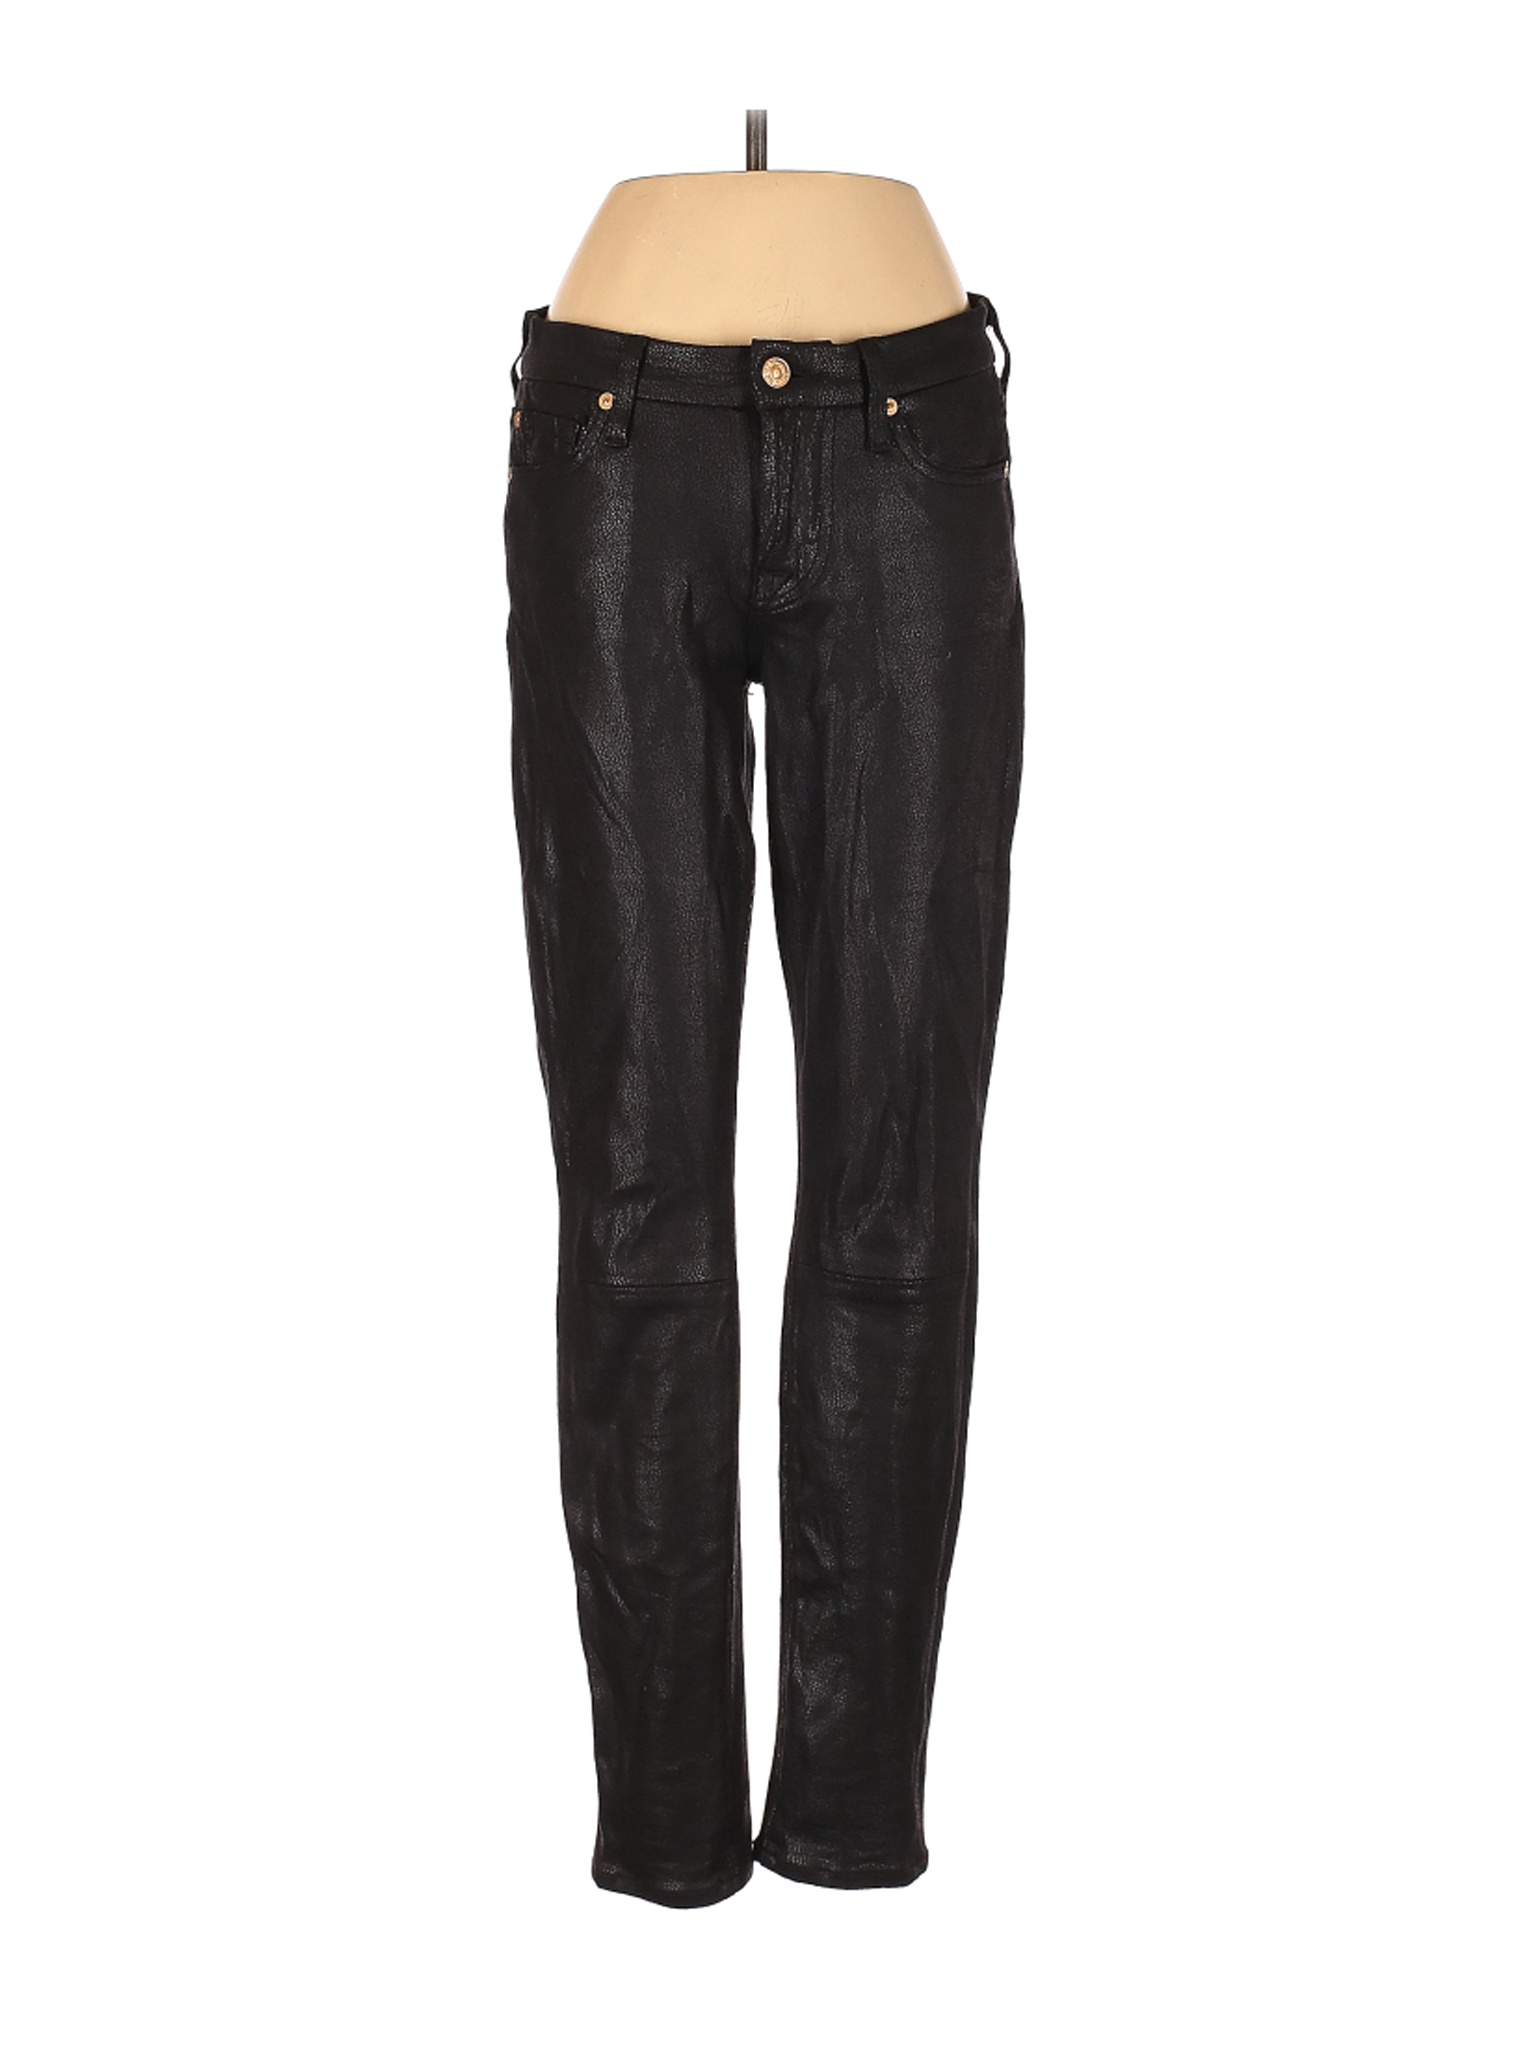 7 for all mankind leather pants